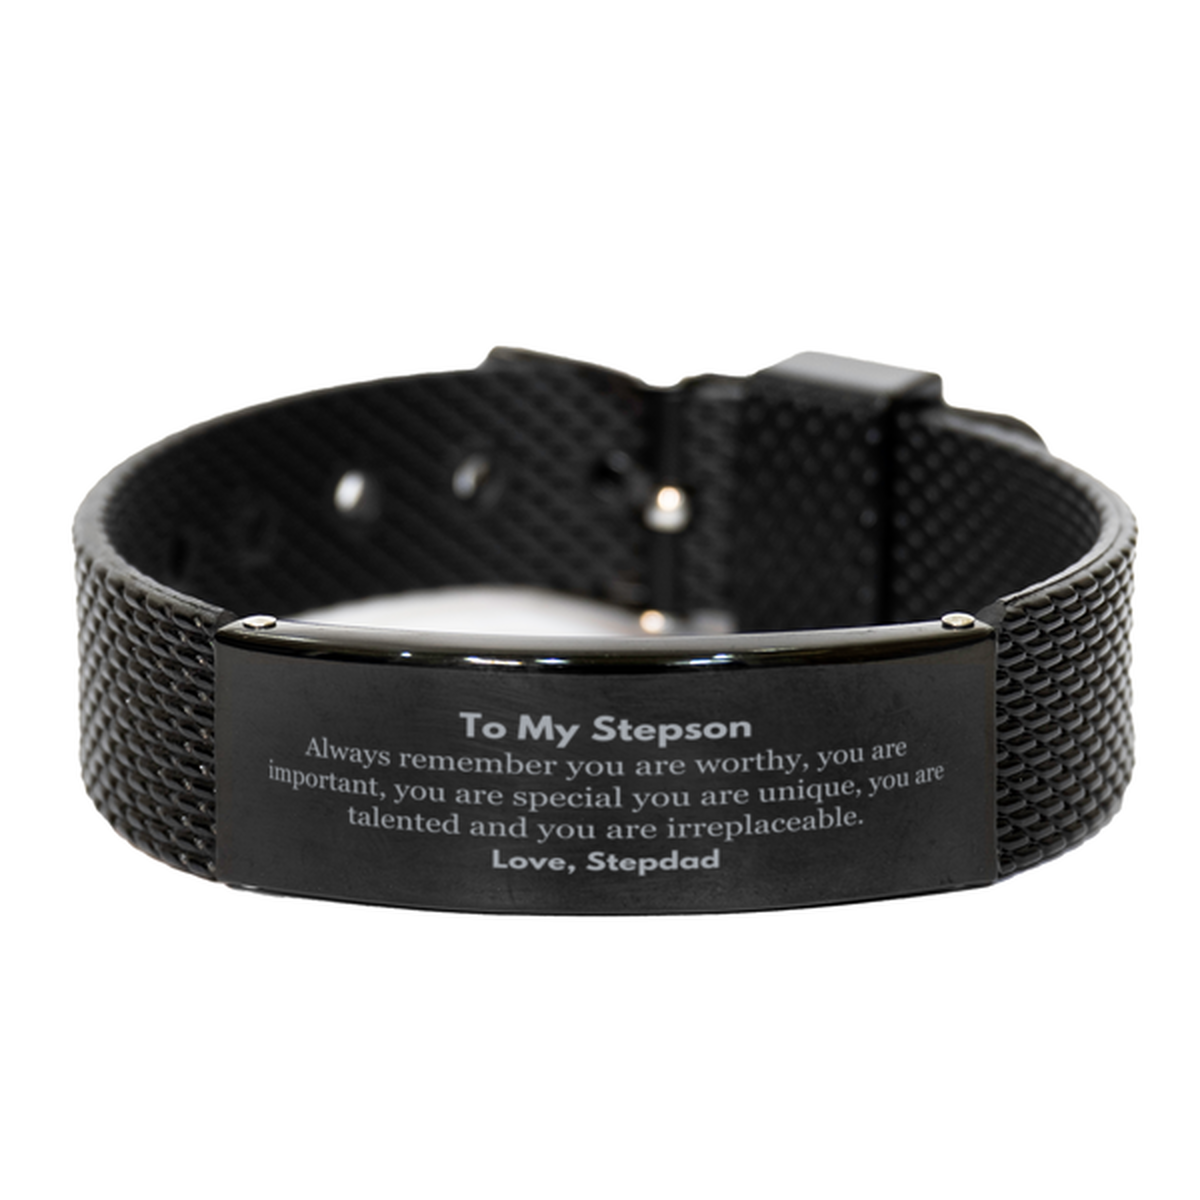 Stepson Birthday Gifts from Stepdad, Inspirational Black Shark Mesh Bracelet for Stepson Christmas Graduation Gifts for Stepson Always remember you are worthy, you are important. Love, Stepdad